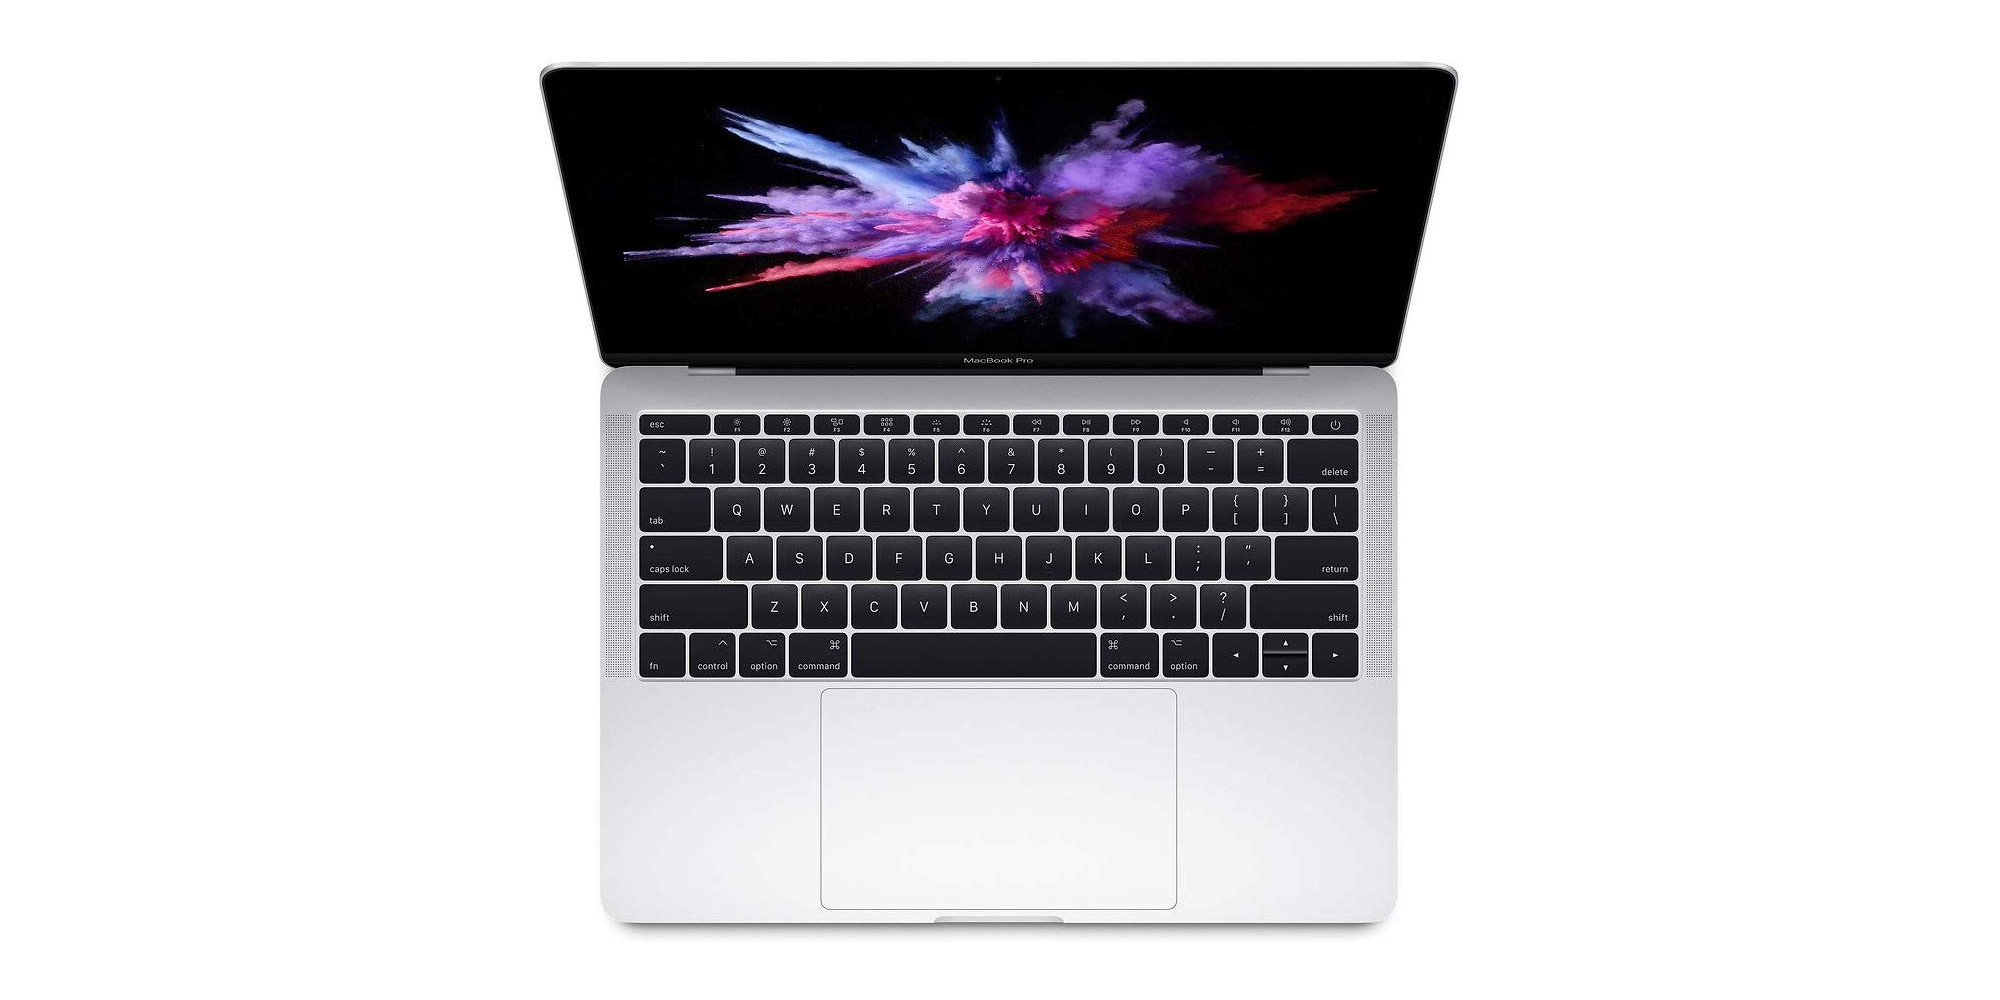 Apple's 13-inch MacBook Pro (Mid-2017) on sale from $780 at Amazon 